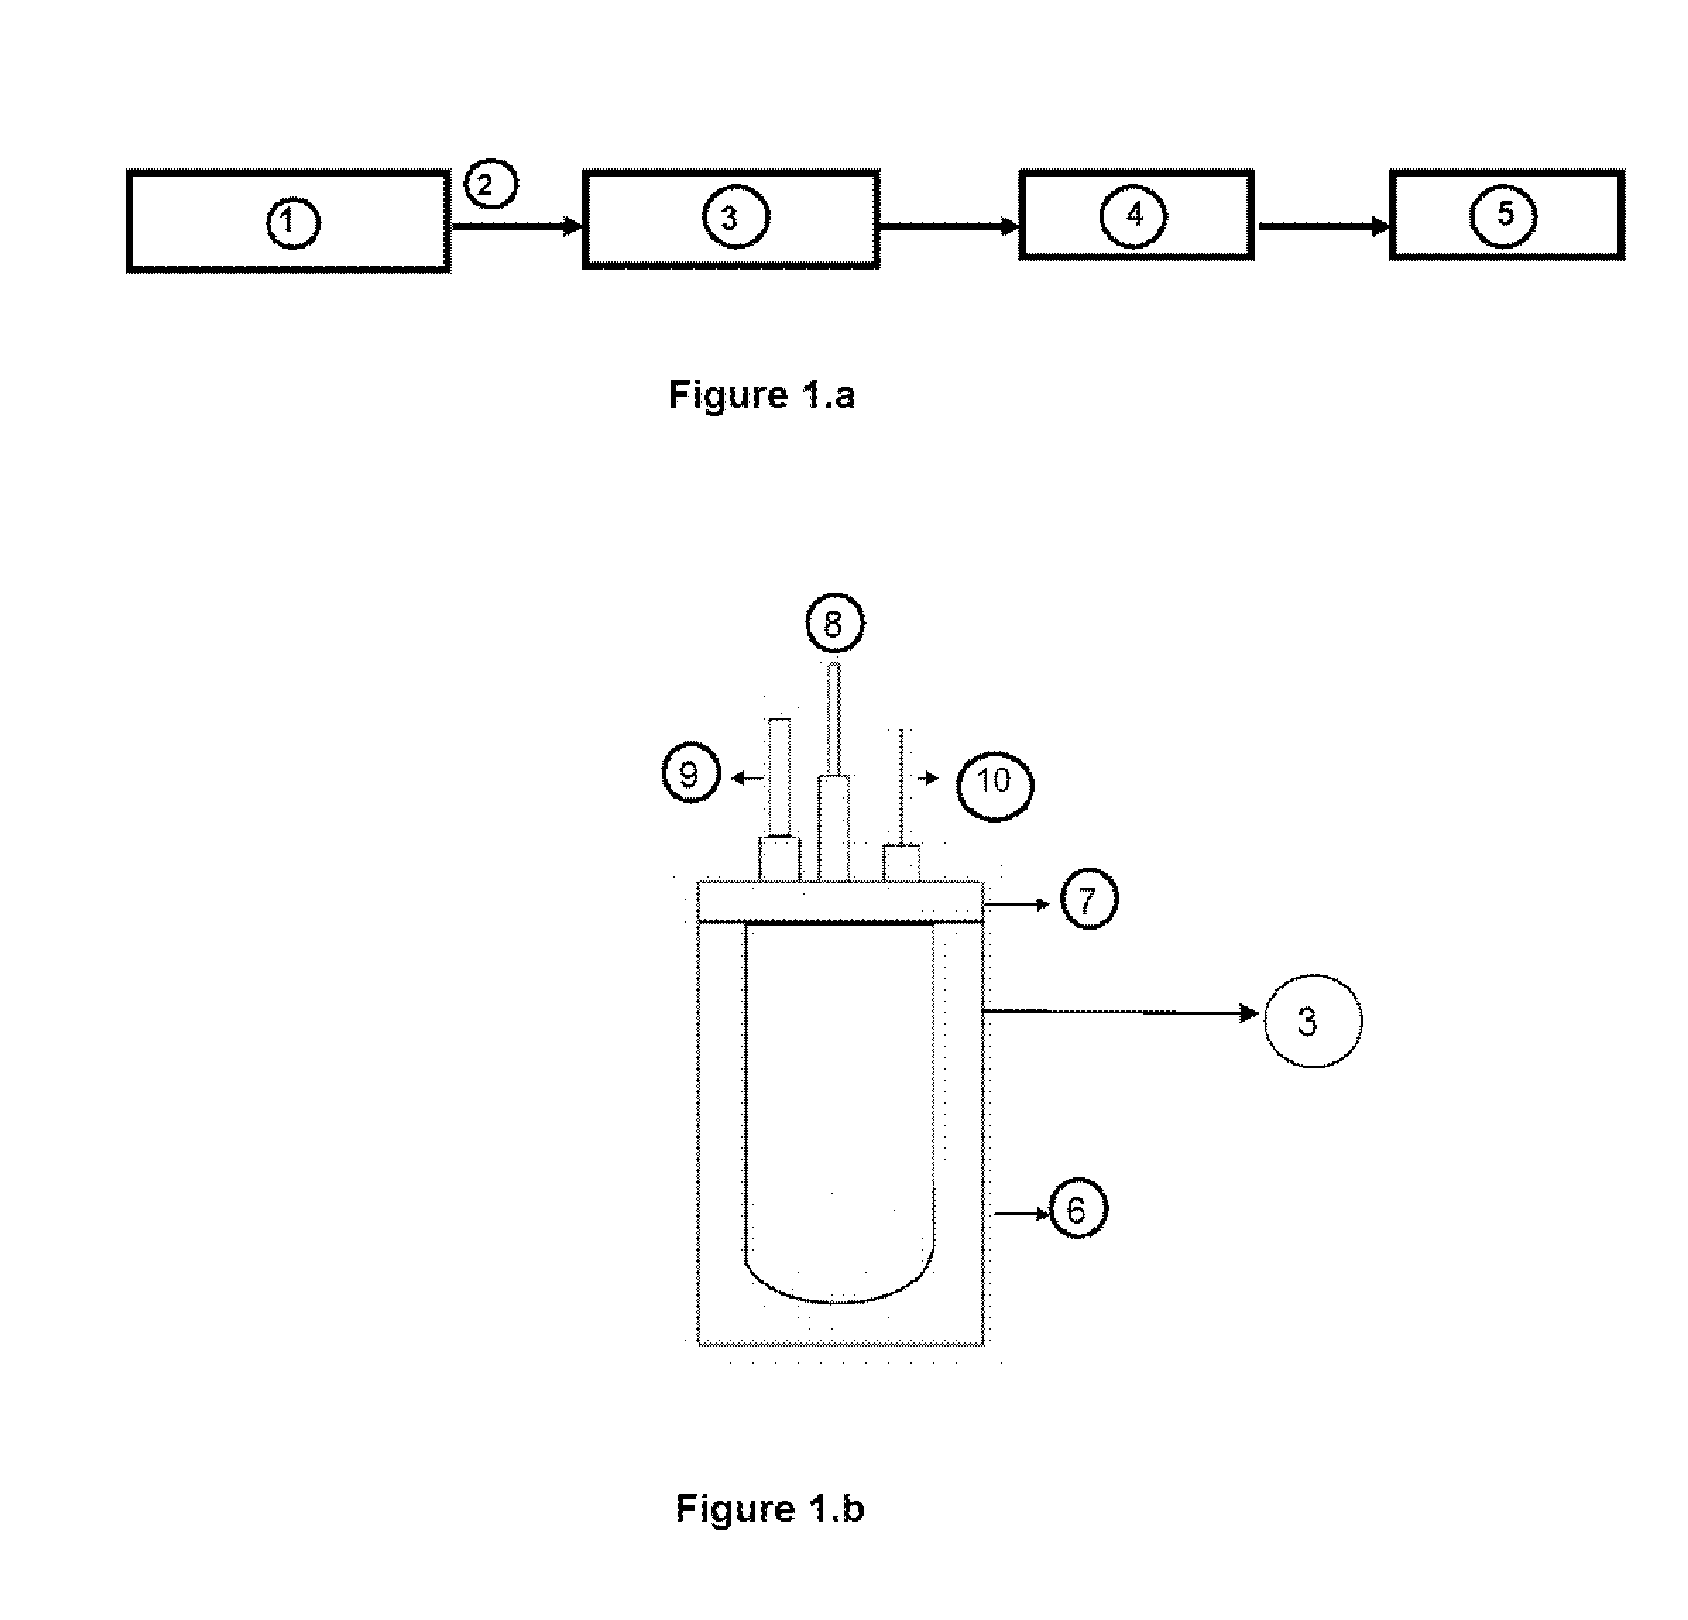 Process for the production of hydrogen by catalyzed hydrolysis of a complex hydride, and facility with semi continuous reactor for carrying out the method